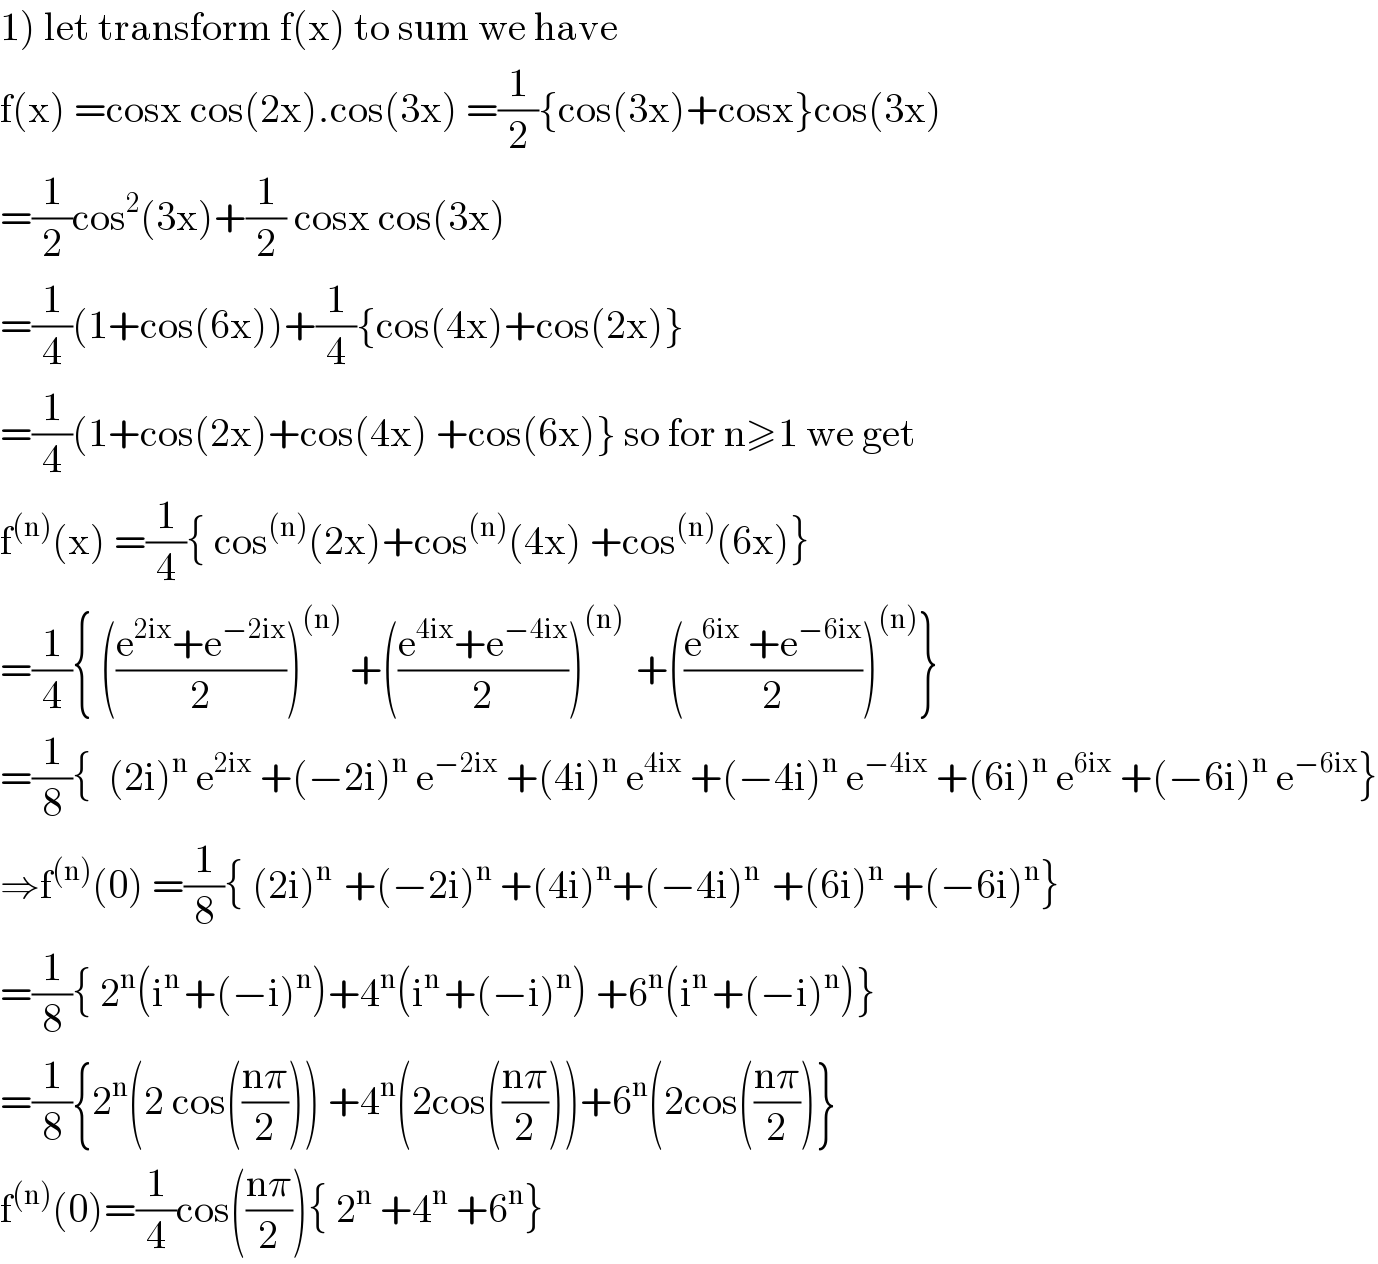 1) let transform f(x) to sum we have   f(x) =cosx cos(2x).cos(3x) =(1/2){cos(3x)+cosx}cos(3x)  =(1/2)cos^2 (3x)+(1/2) cosx cos(3x)  =(1/4)(1+cos(6x))+(1/4){cos(4x)+cos(2x)}  =(1/4)(1+cos(2x)+cos(4x) +cos(6x)} so for n≥1 we get  f^((n)) (x) =(1/4){ cos^((n)) (2x)+cos^((n)) (4x) +cos^((n)) (6x)}  =(1/4){ (((e^(2ix) +e^(−2ix) )/2))^((n))  +(((e^(4ix) +e^(−4ix) )/2))^((n) )  +(((e^(6ix)  +e^(−6ix) )/2))^((n)) }  =(1/8){  (2i)^n  e^(2ix)  +(−2i)^n  e^(−2ix)  +(4i)^n  e^(4ix)  +(−4i)^n  e^(−4ix)  +(6i)^n  e^(6ix)  +(−6i)^n  e^(−6ix) }  ⇒f^((n)) (0) =(1/8){ (2i)^(n )  +(−2i)^n  +(4i)^n +(−4i)^(n )  +(6i)^n  +(−6i)^n }  =(1/8){ 2^n (i^(n ) +(−i)^n )+4^n (i^(n ) +(−i)^n ) +6^n (i^(n ) +(−i)^n )}  =(1/8){2^n (2 cos(((nπ)/2))) +4^n (2cos(((nπ)/2)))+6^n (2cos(((nπ)/2))}  f^((n)) (0)=(1/4)cos(((nπ)/2)){ 2^n  +4^n  +6^n }  